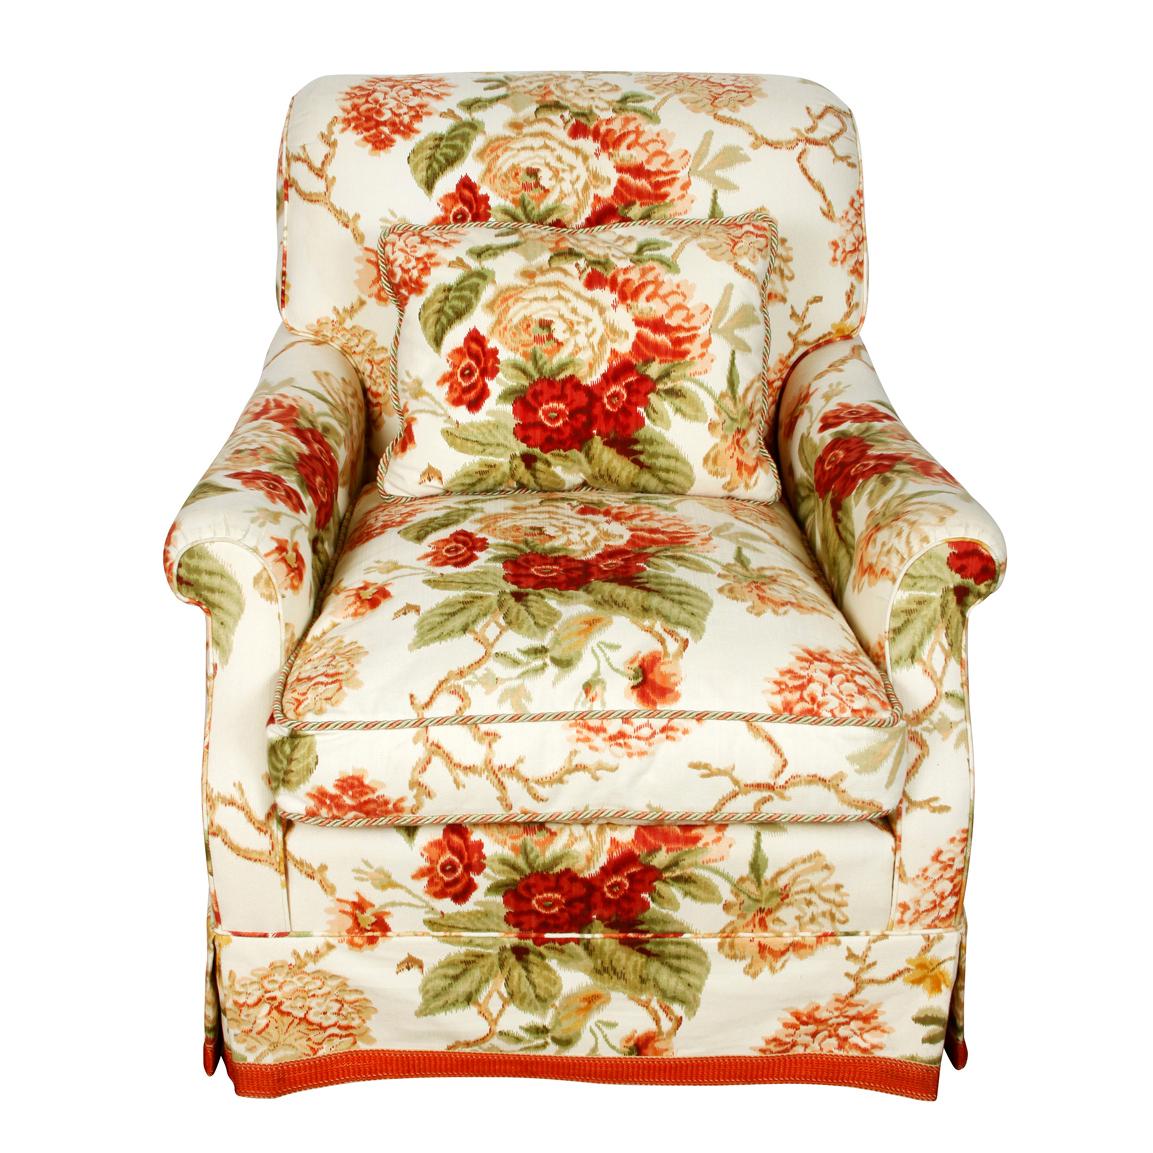 Large Bridgewater upholstered club chair in cowtan and tout red floral fabric.